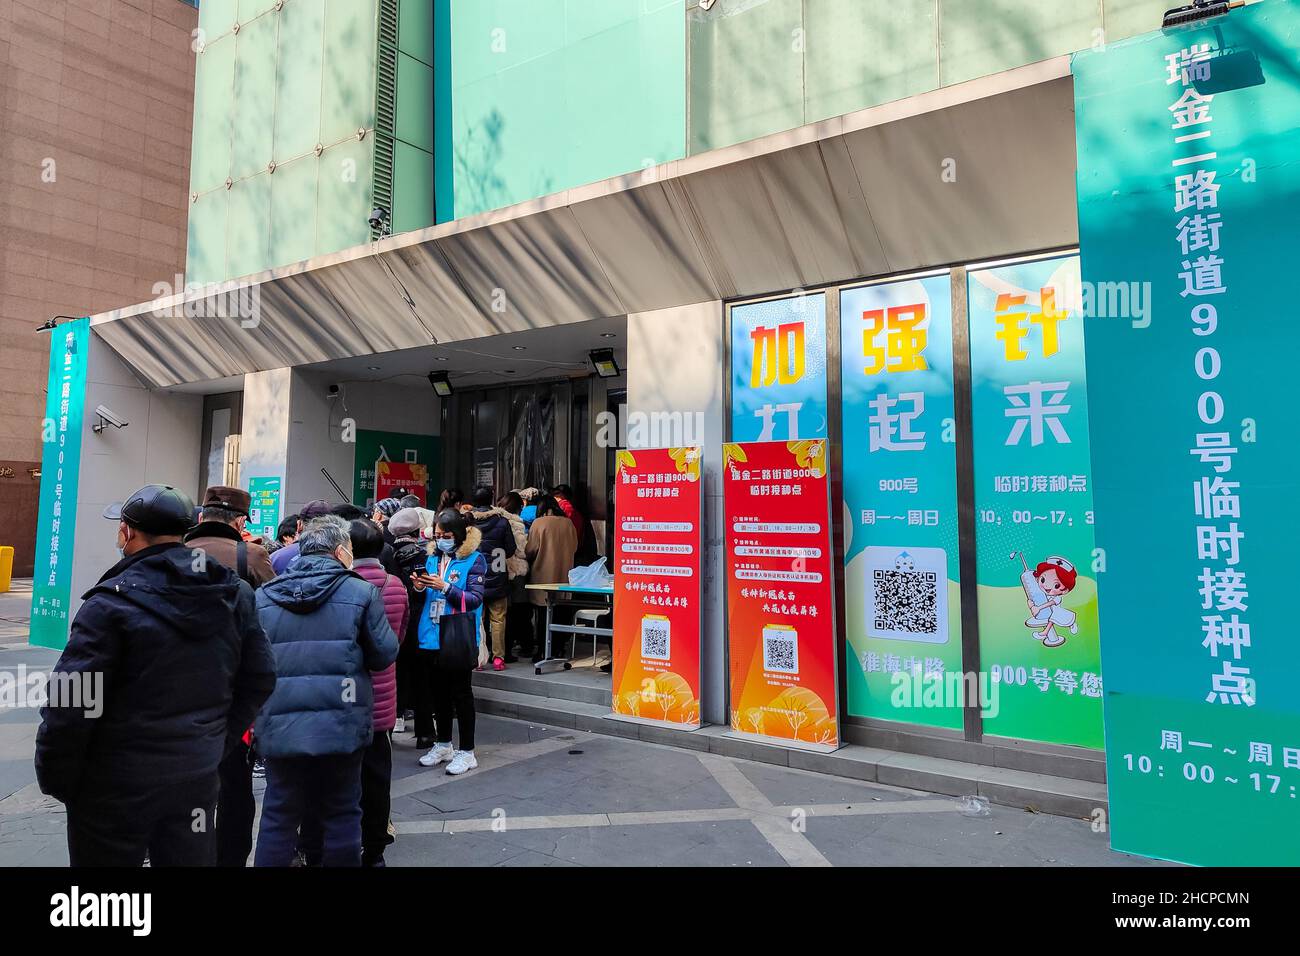 SHANGHAI, CHINA - DECEMBER 31, 2021 - People wait in a long line for COVID-19 Booster Needle in Shanghai, China, on December 31, 2021. Stock Photo